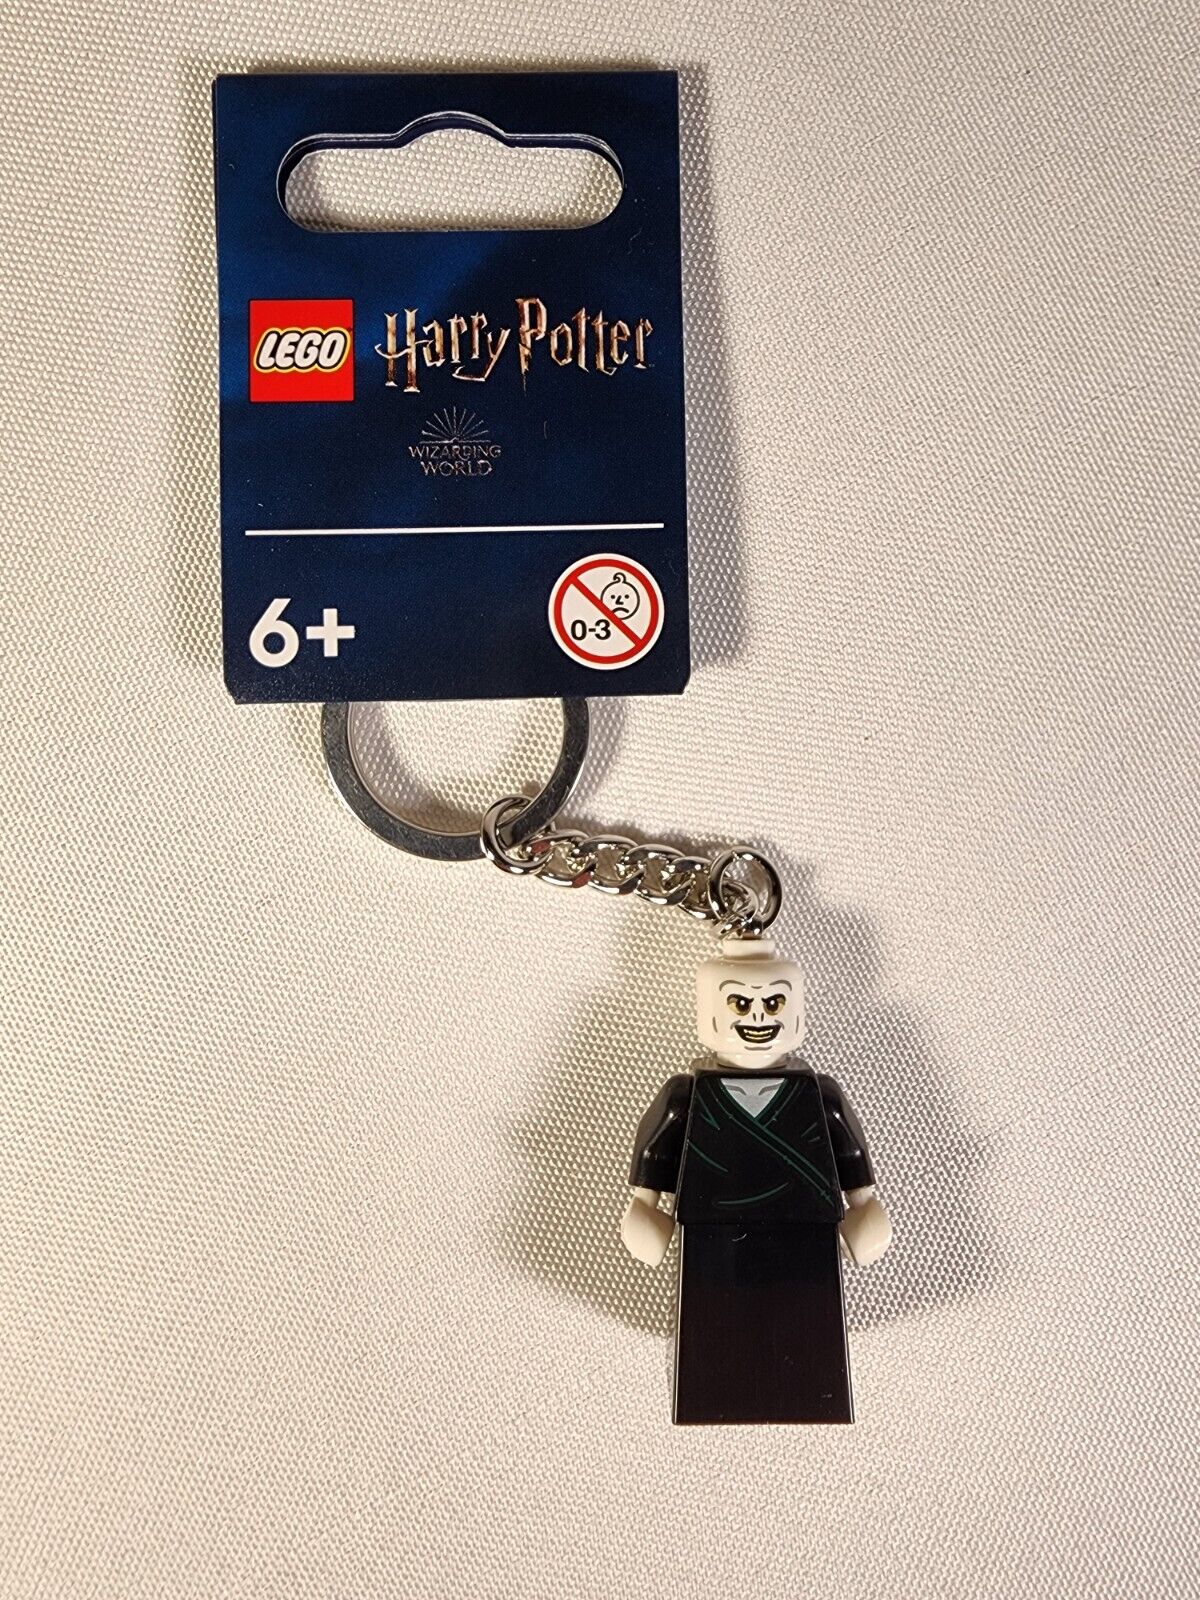 LEGO: Harry Potter - Voldemort Keychain (854155) - New with tag